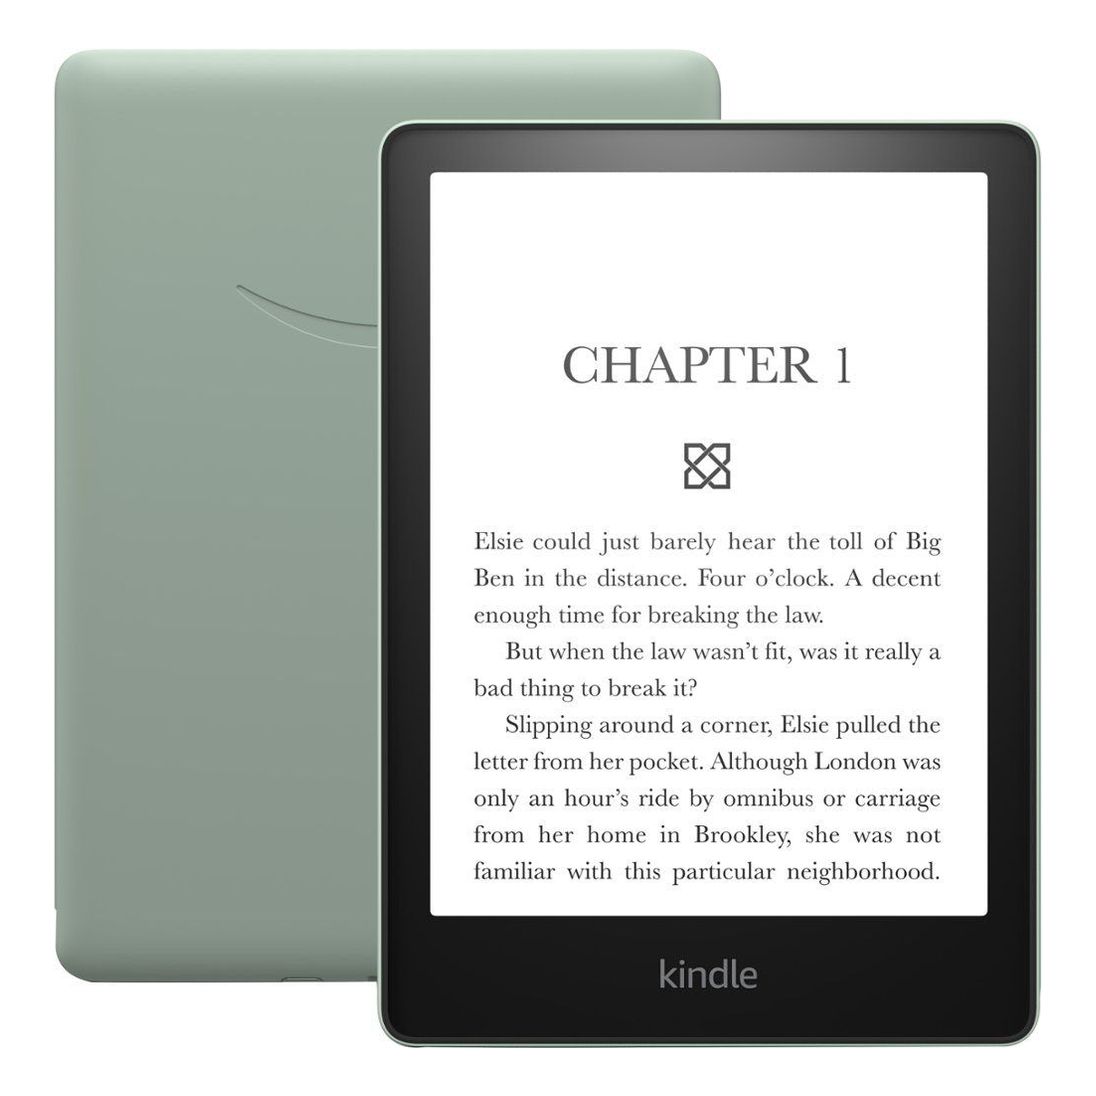 Amazon Kindle Paperwhite 6.8 16GB (with Ads) - Agave Green